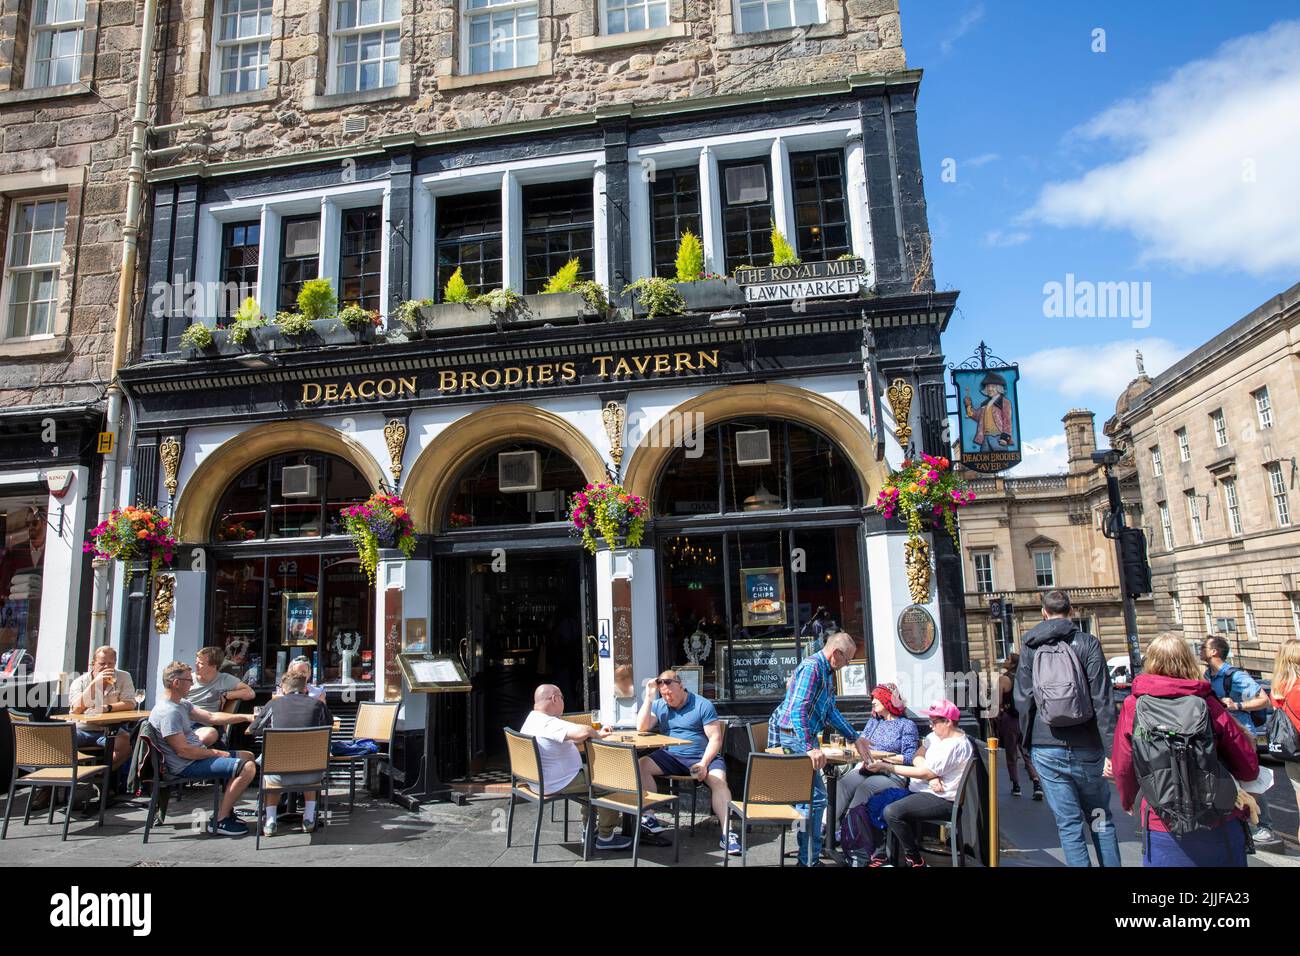 Deacon Brodie's tavern on lawnmarket Royal Mile Edinburgh, named after William Brodie a 18th century councillor, locksmith  and housebreaker, Edinburgh Stock Photo